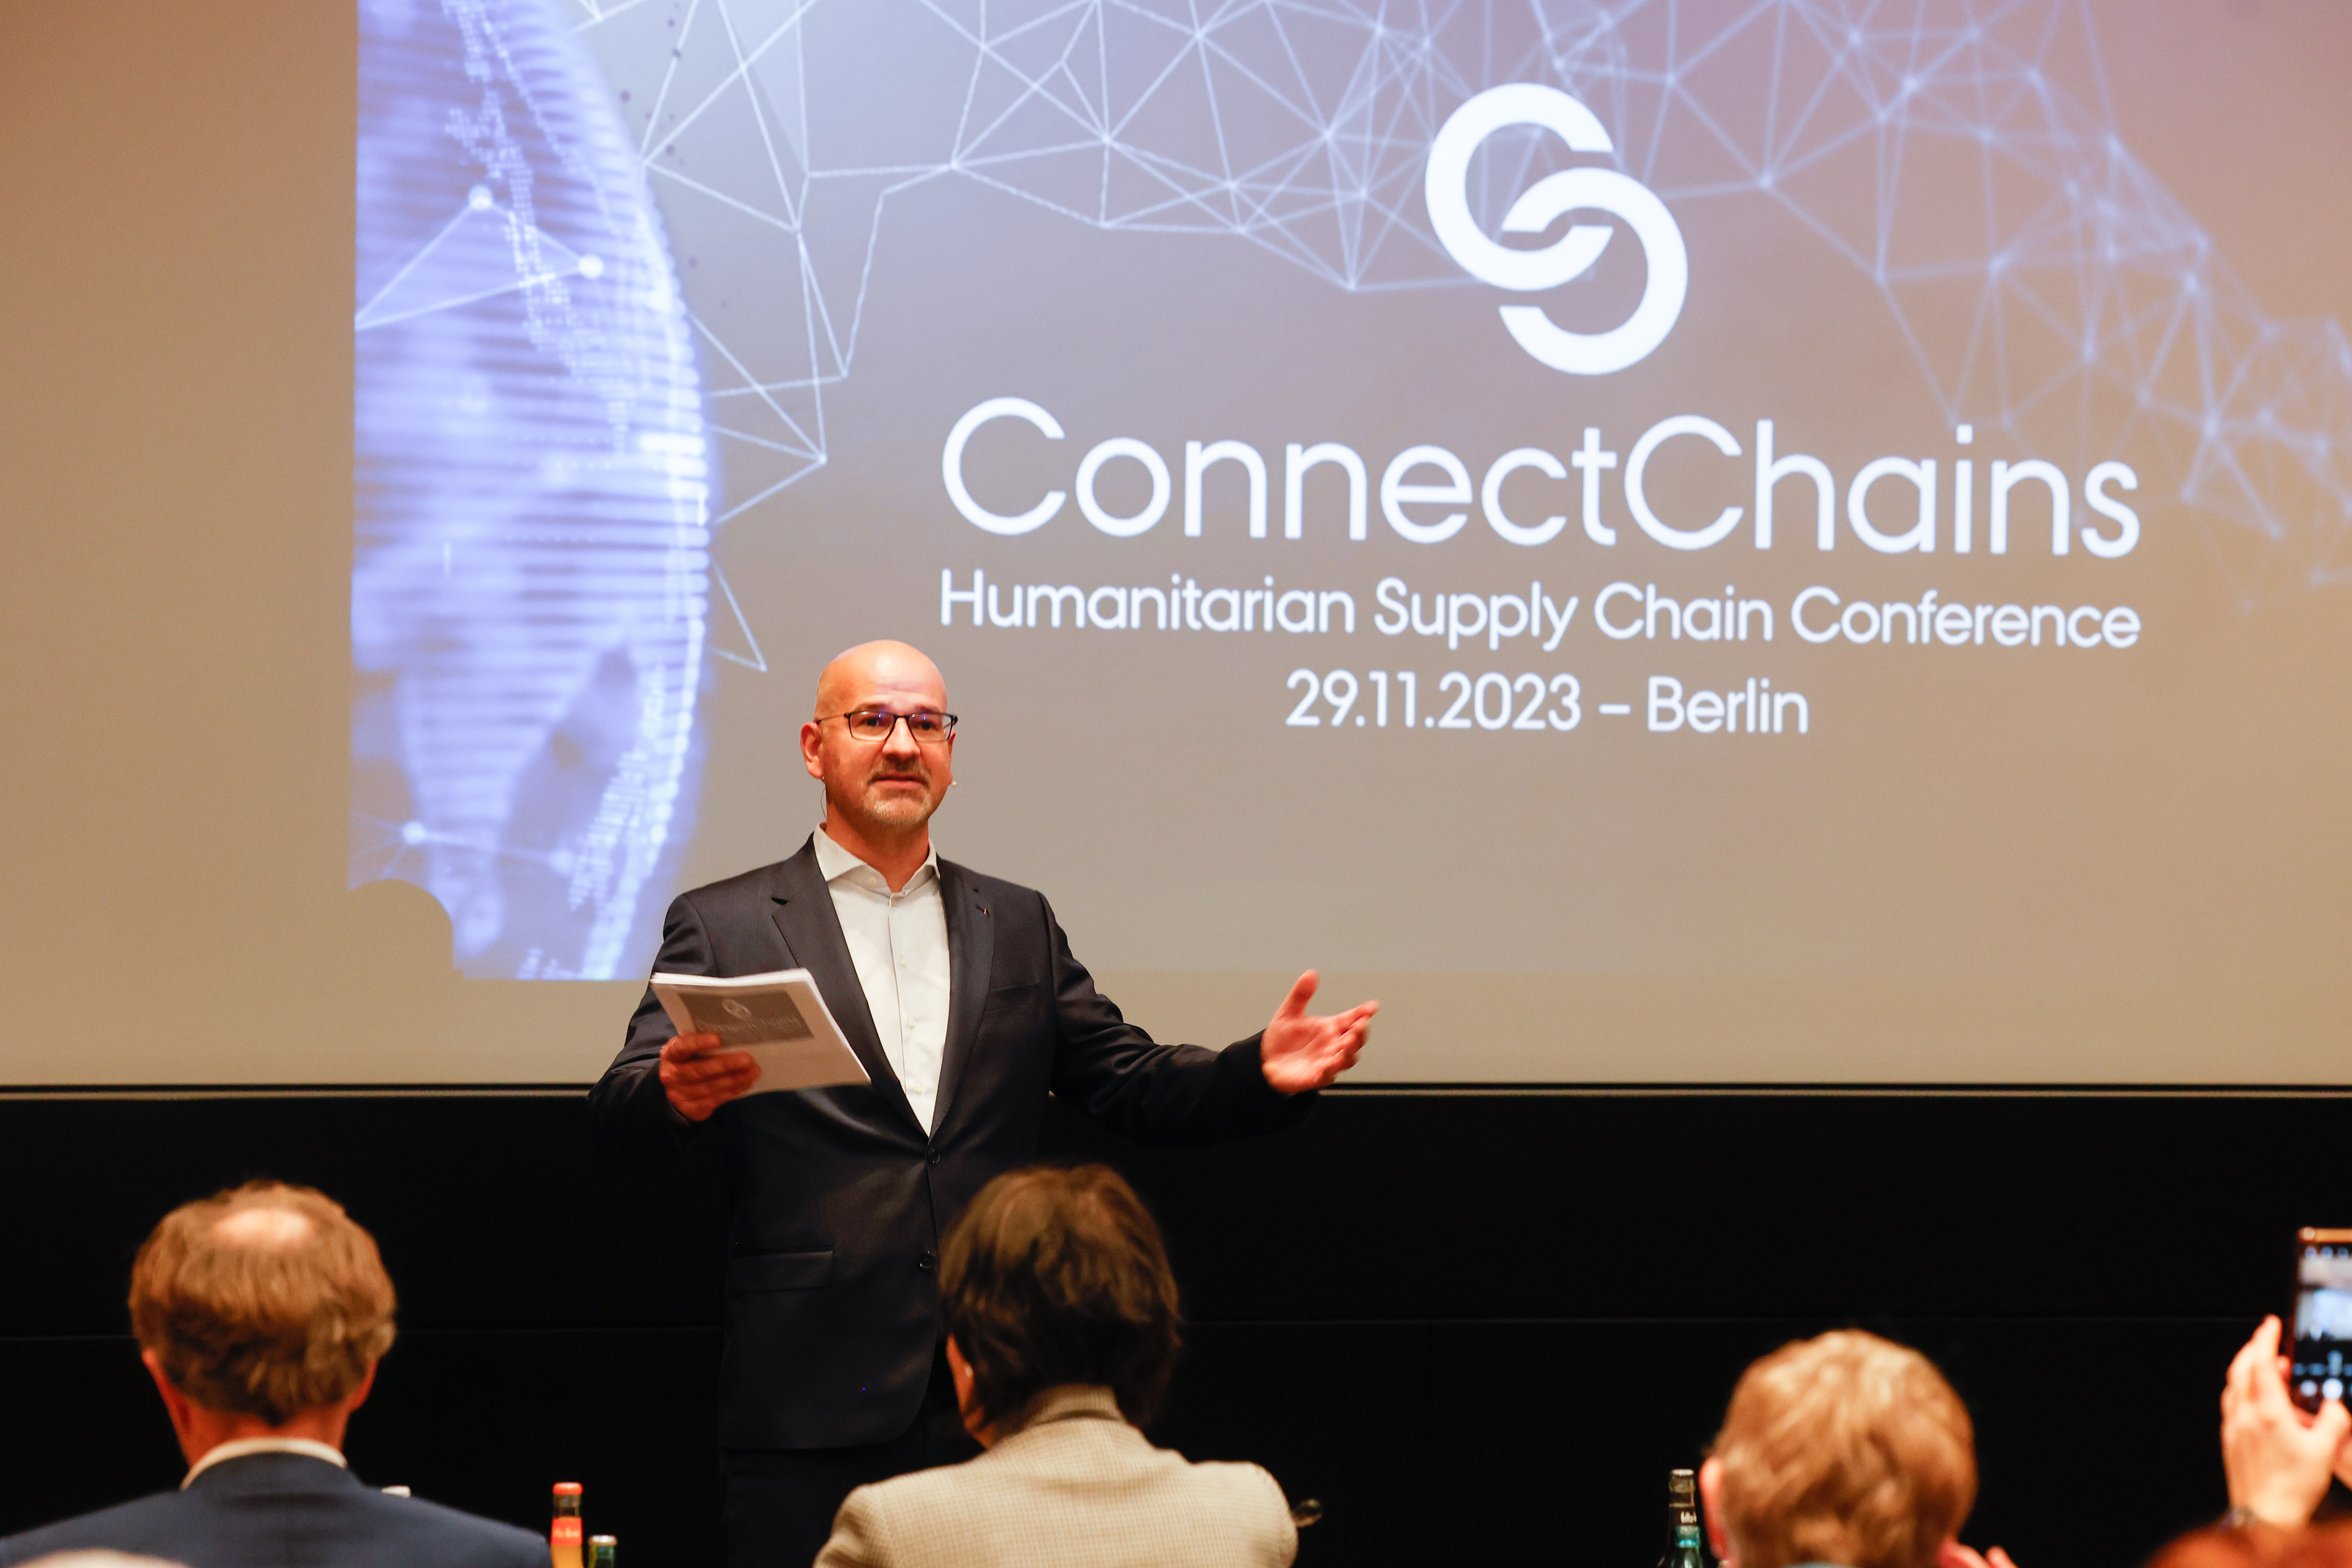 ConnectChains premiere: Collaborations and agile supply chains can improve disaster relief